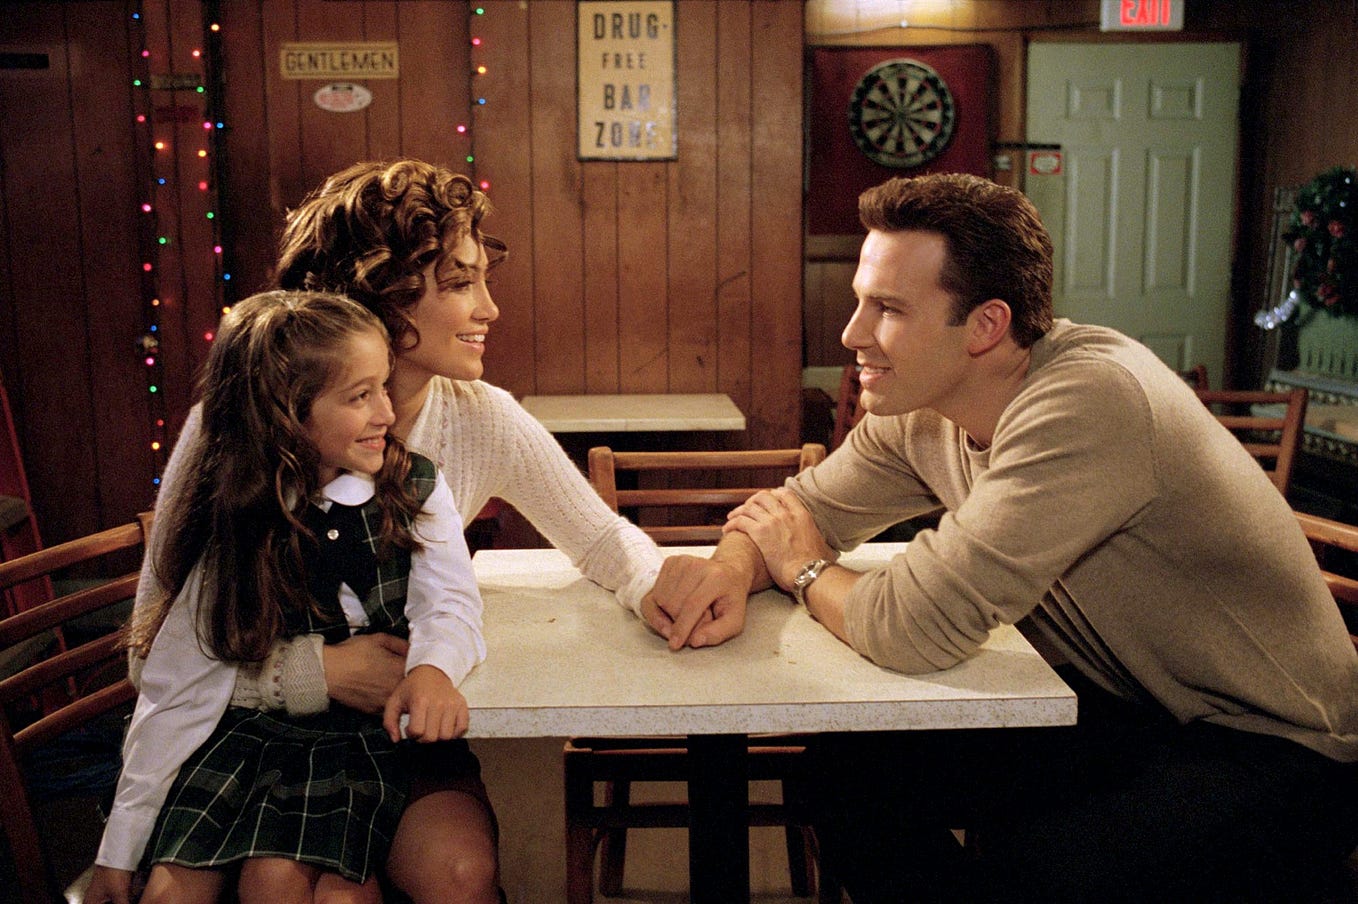 Ben Affleck, Jennifer Lopez, and Raquel Castro in a scene from Jersey Girl by Kevin Smith that didn’t actually happen in the movie.